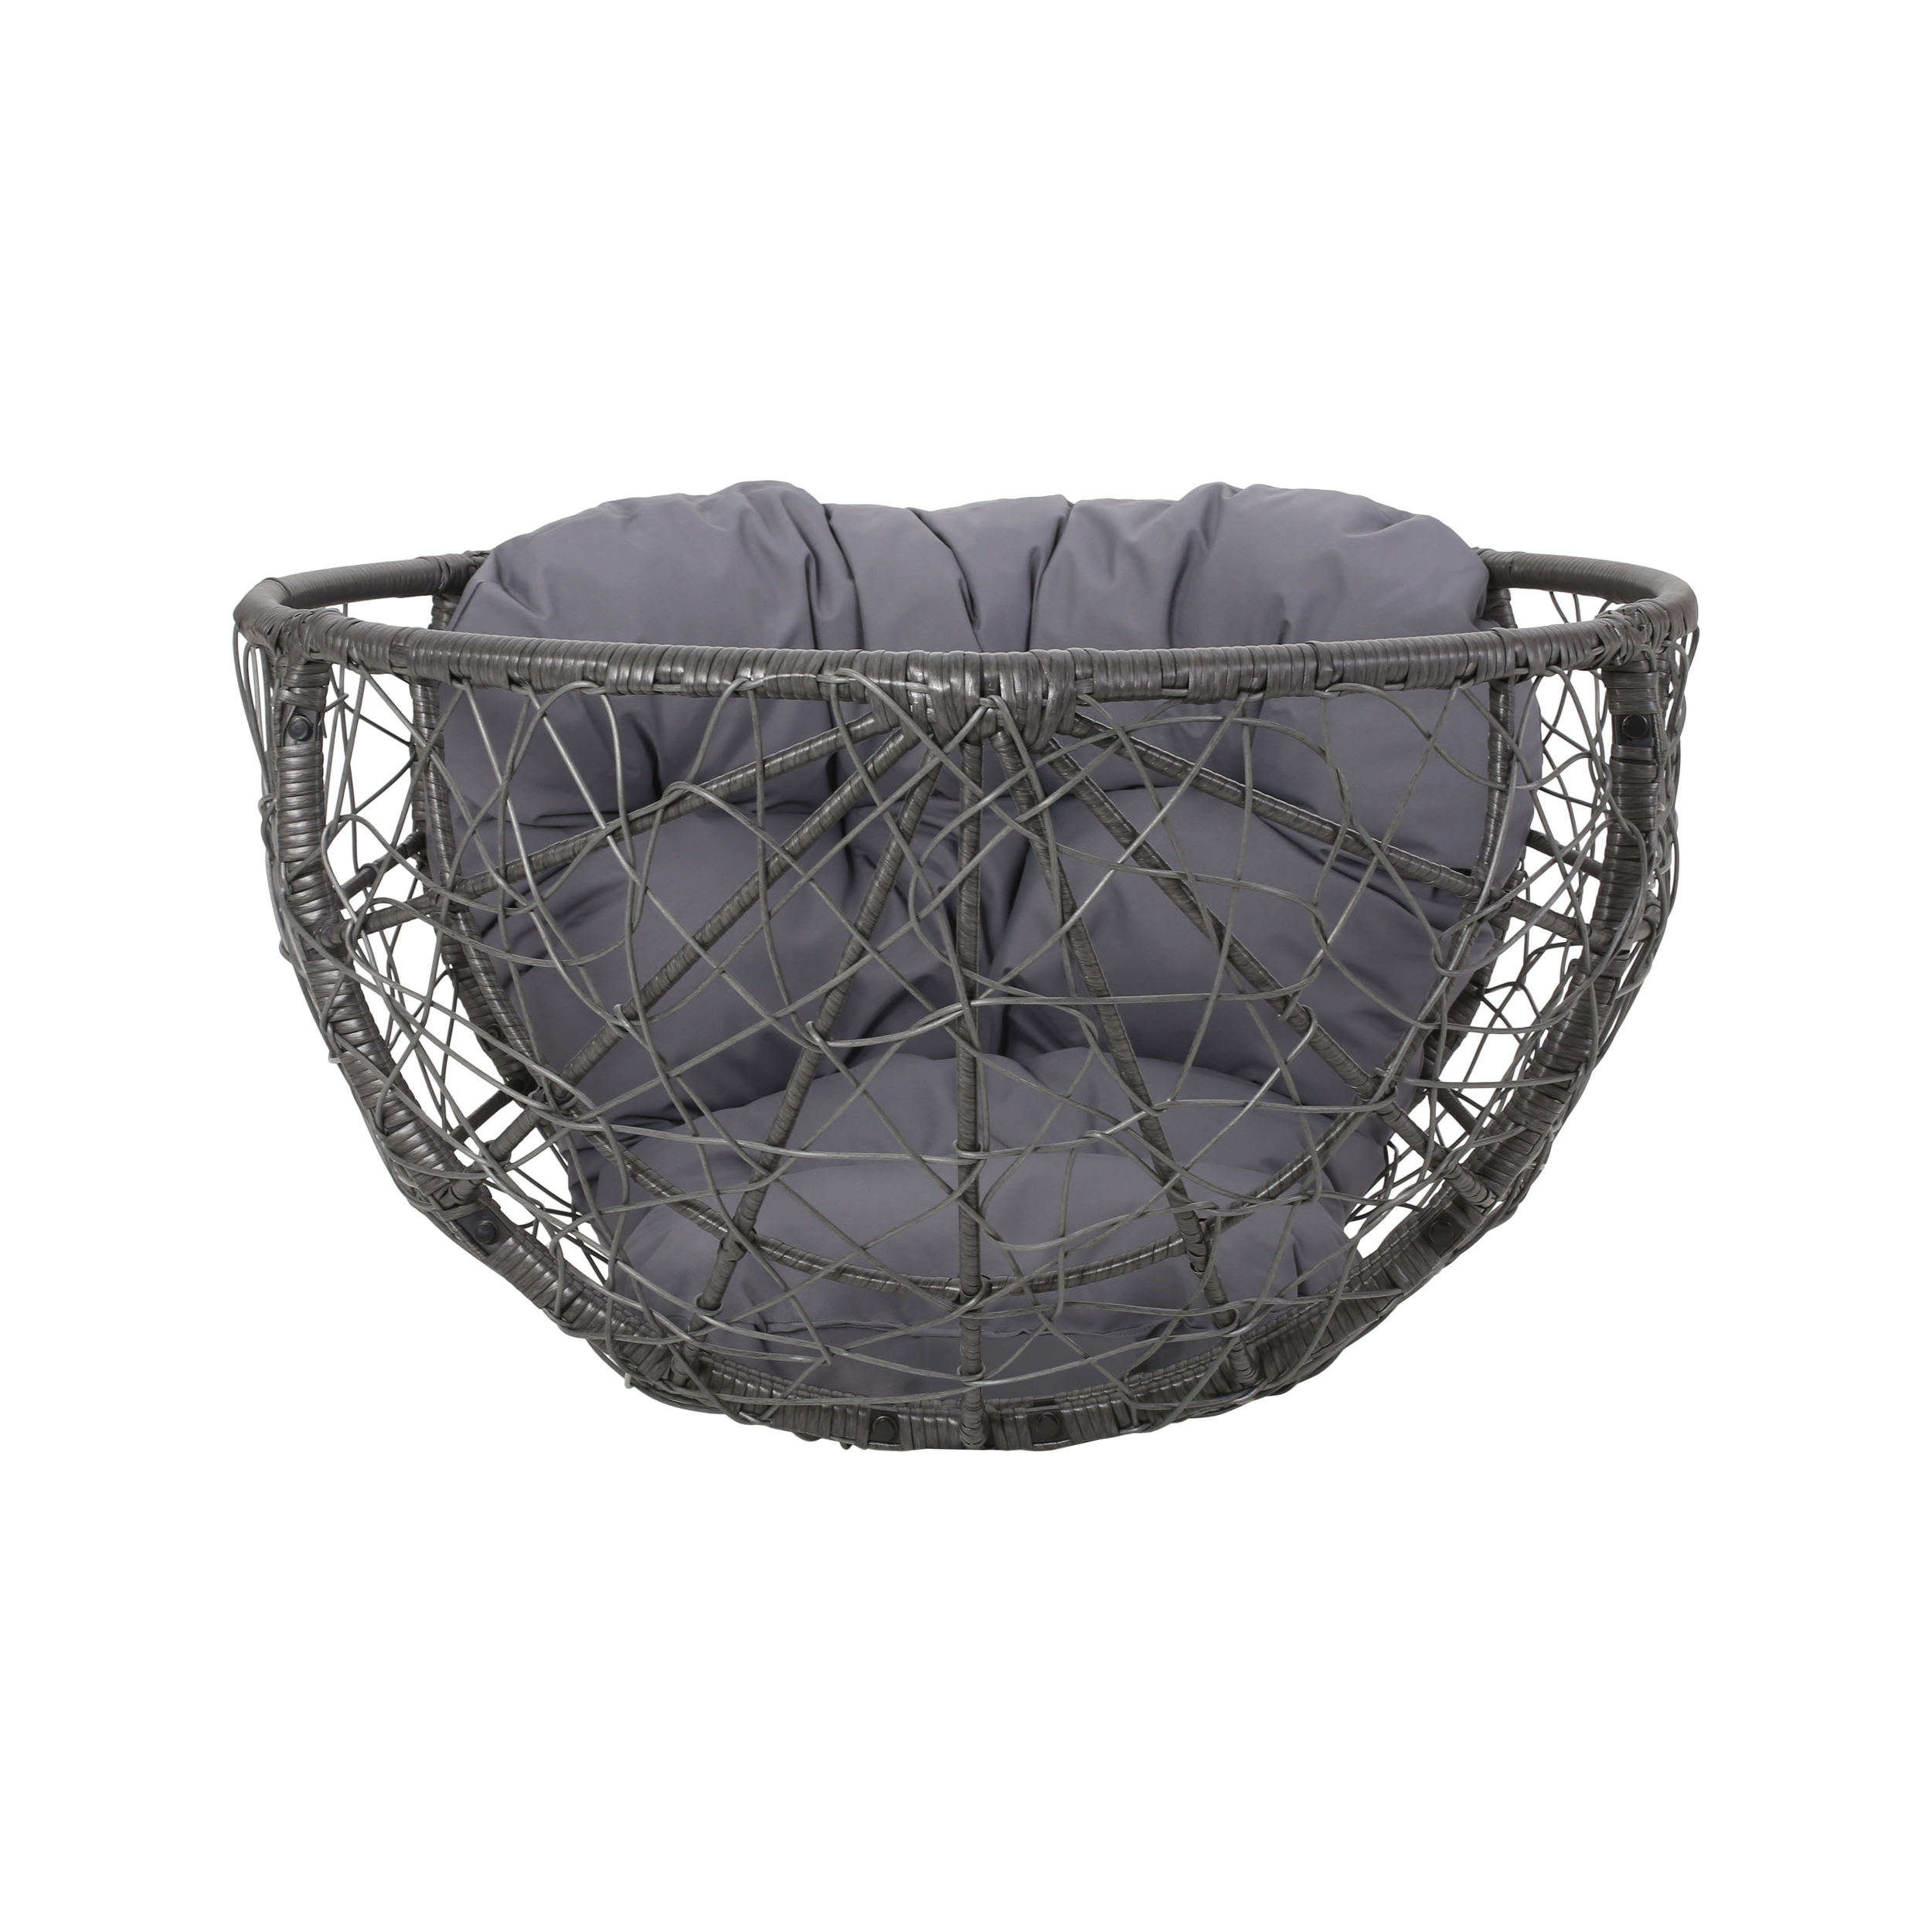 Keondre Indoor Wicker Teardrop Chair with Cushion, Gray and Dark Gray - image 3 of 11